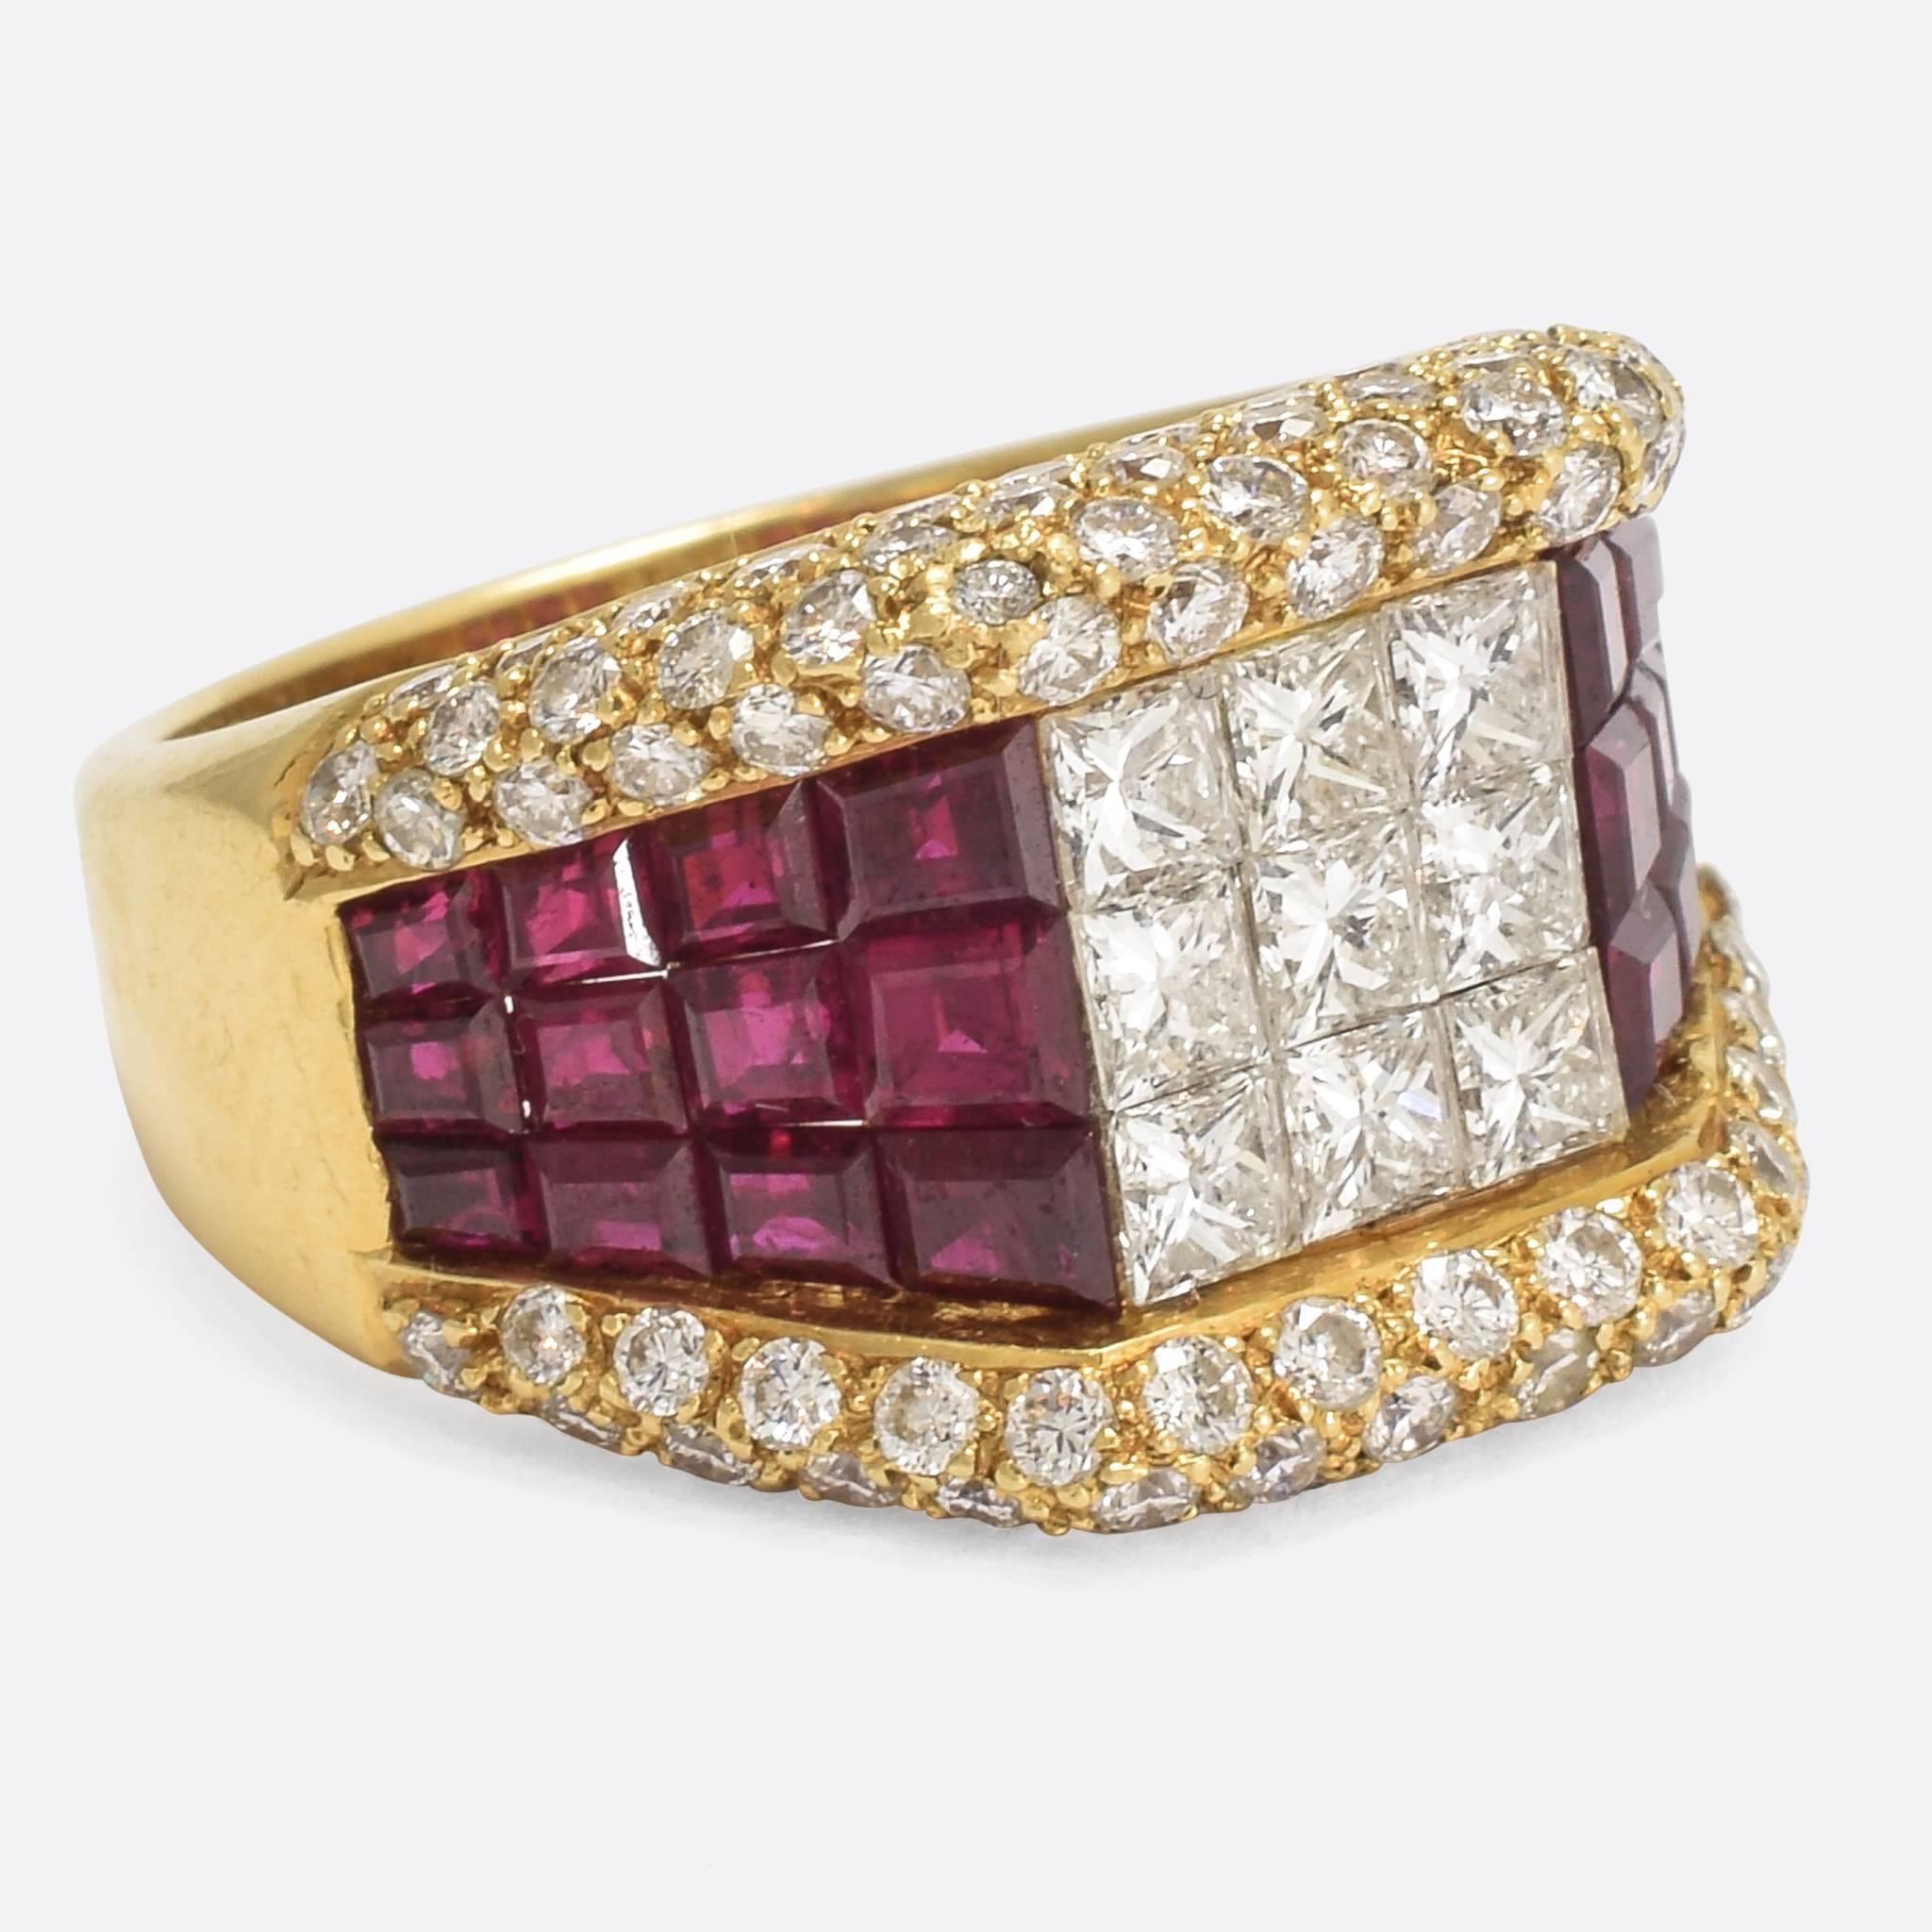 This modern ruby and diamond ring dates to the 1990s... and I can totally imagine Tupac or Diddy rocking it as an ultra-bling pinky ring. It's studded with 4.30cts of calibré cut rubies, a 1.0ct square of princess cut diamonds, and 1.30cts of